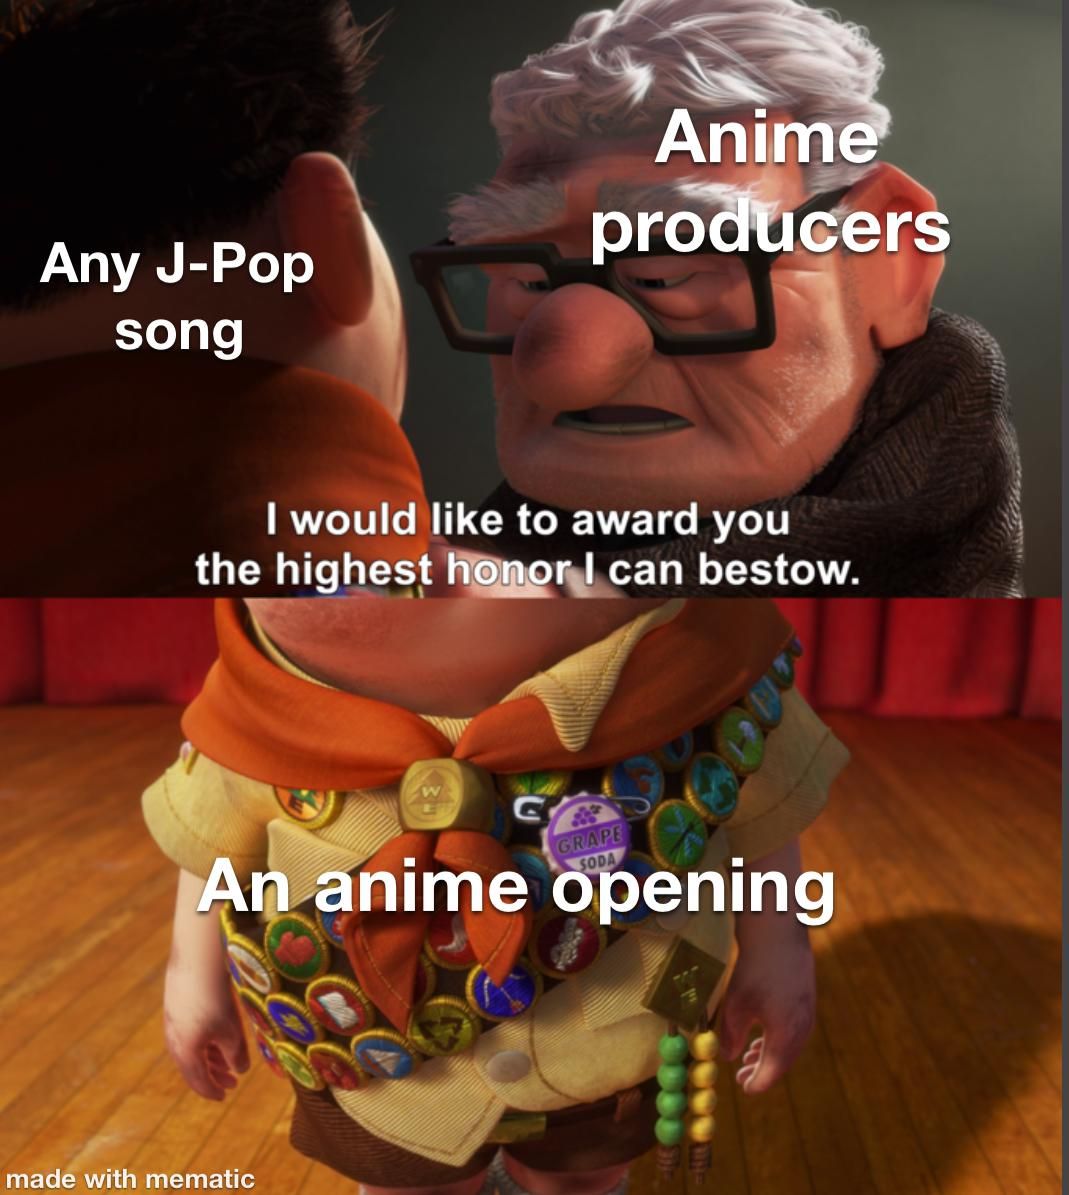 They get advertising and profit, and we get good anime openings